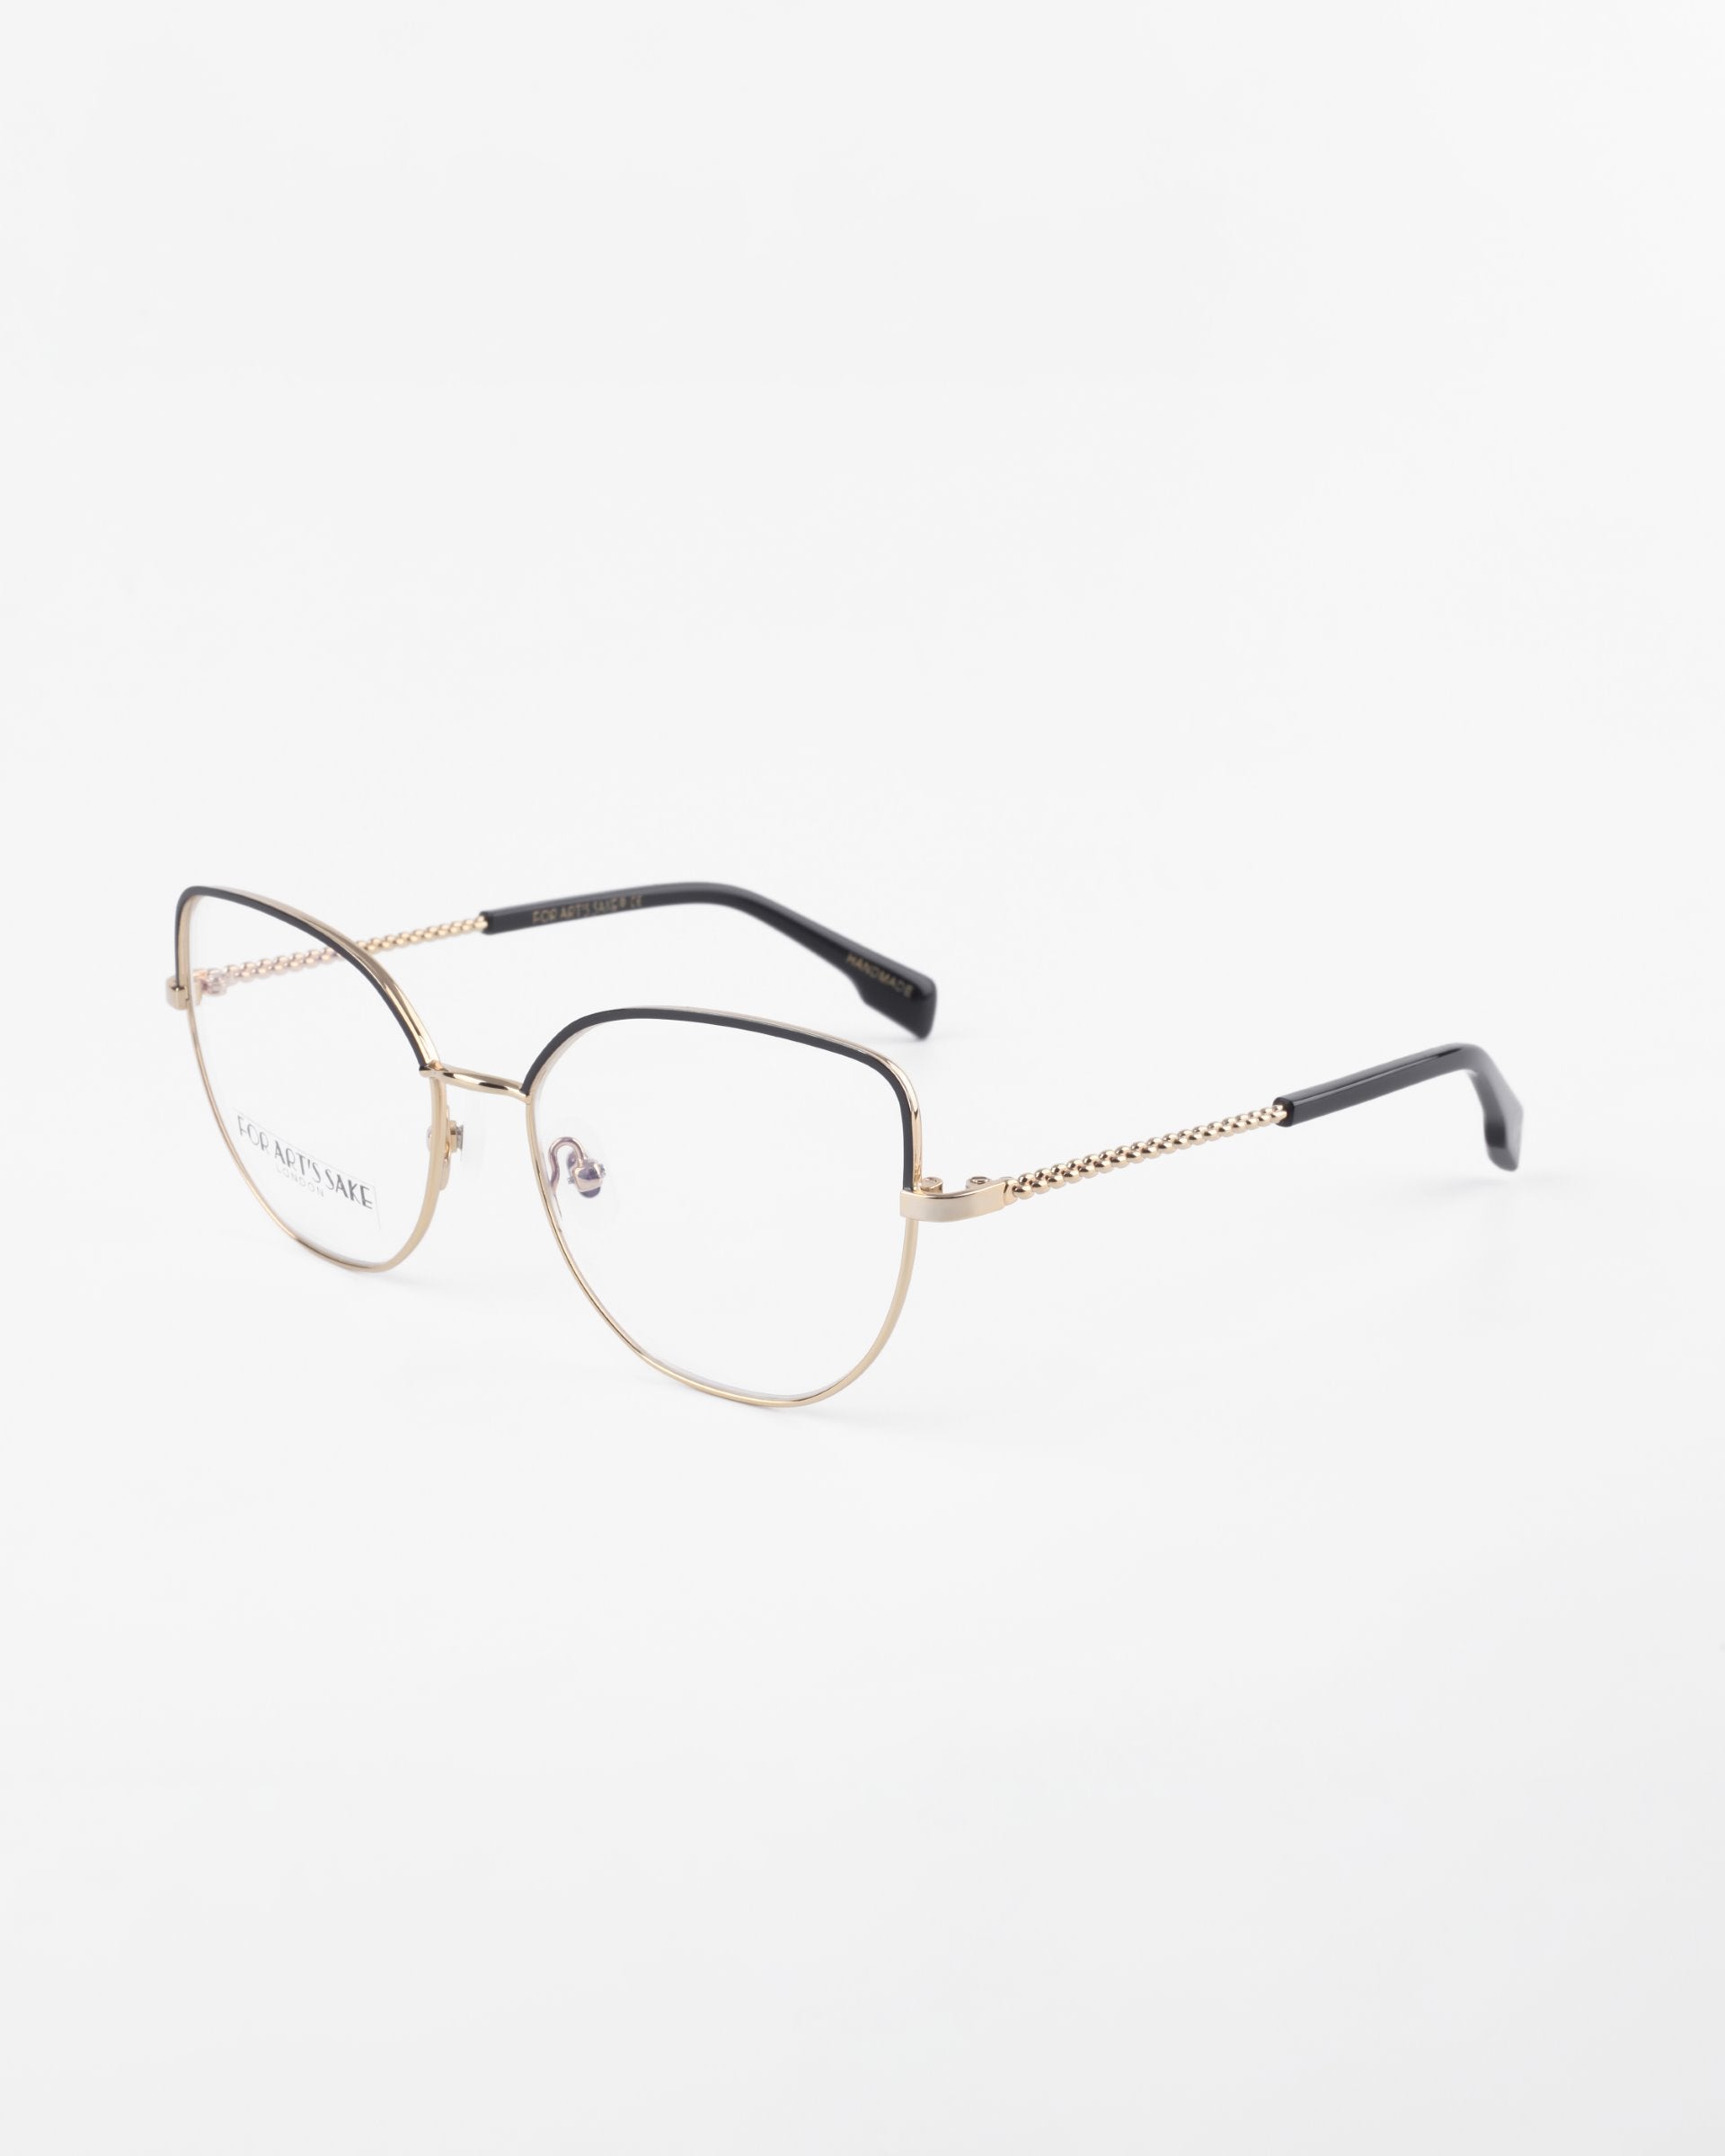 A pair of Ophelia by For Art's Sake® eyeglasses with a gold-colored frame and black earpieces. The frame features a subtle chain-like design on the temples, and the clear lenses come with a blue light filter. The glasses are set against a plain white background.